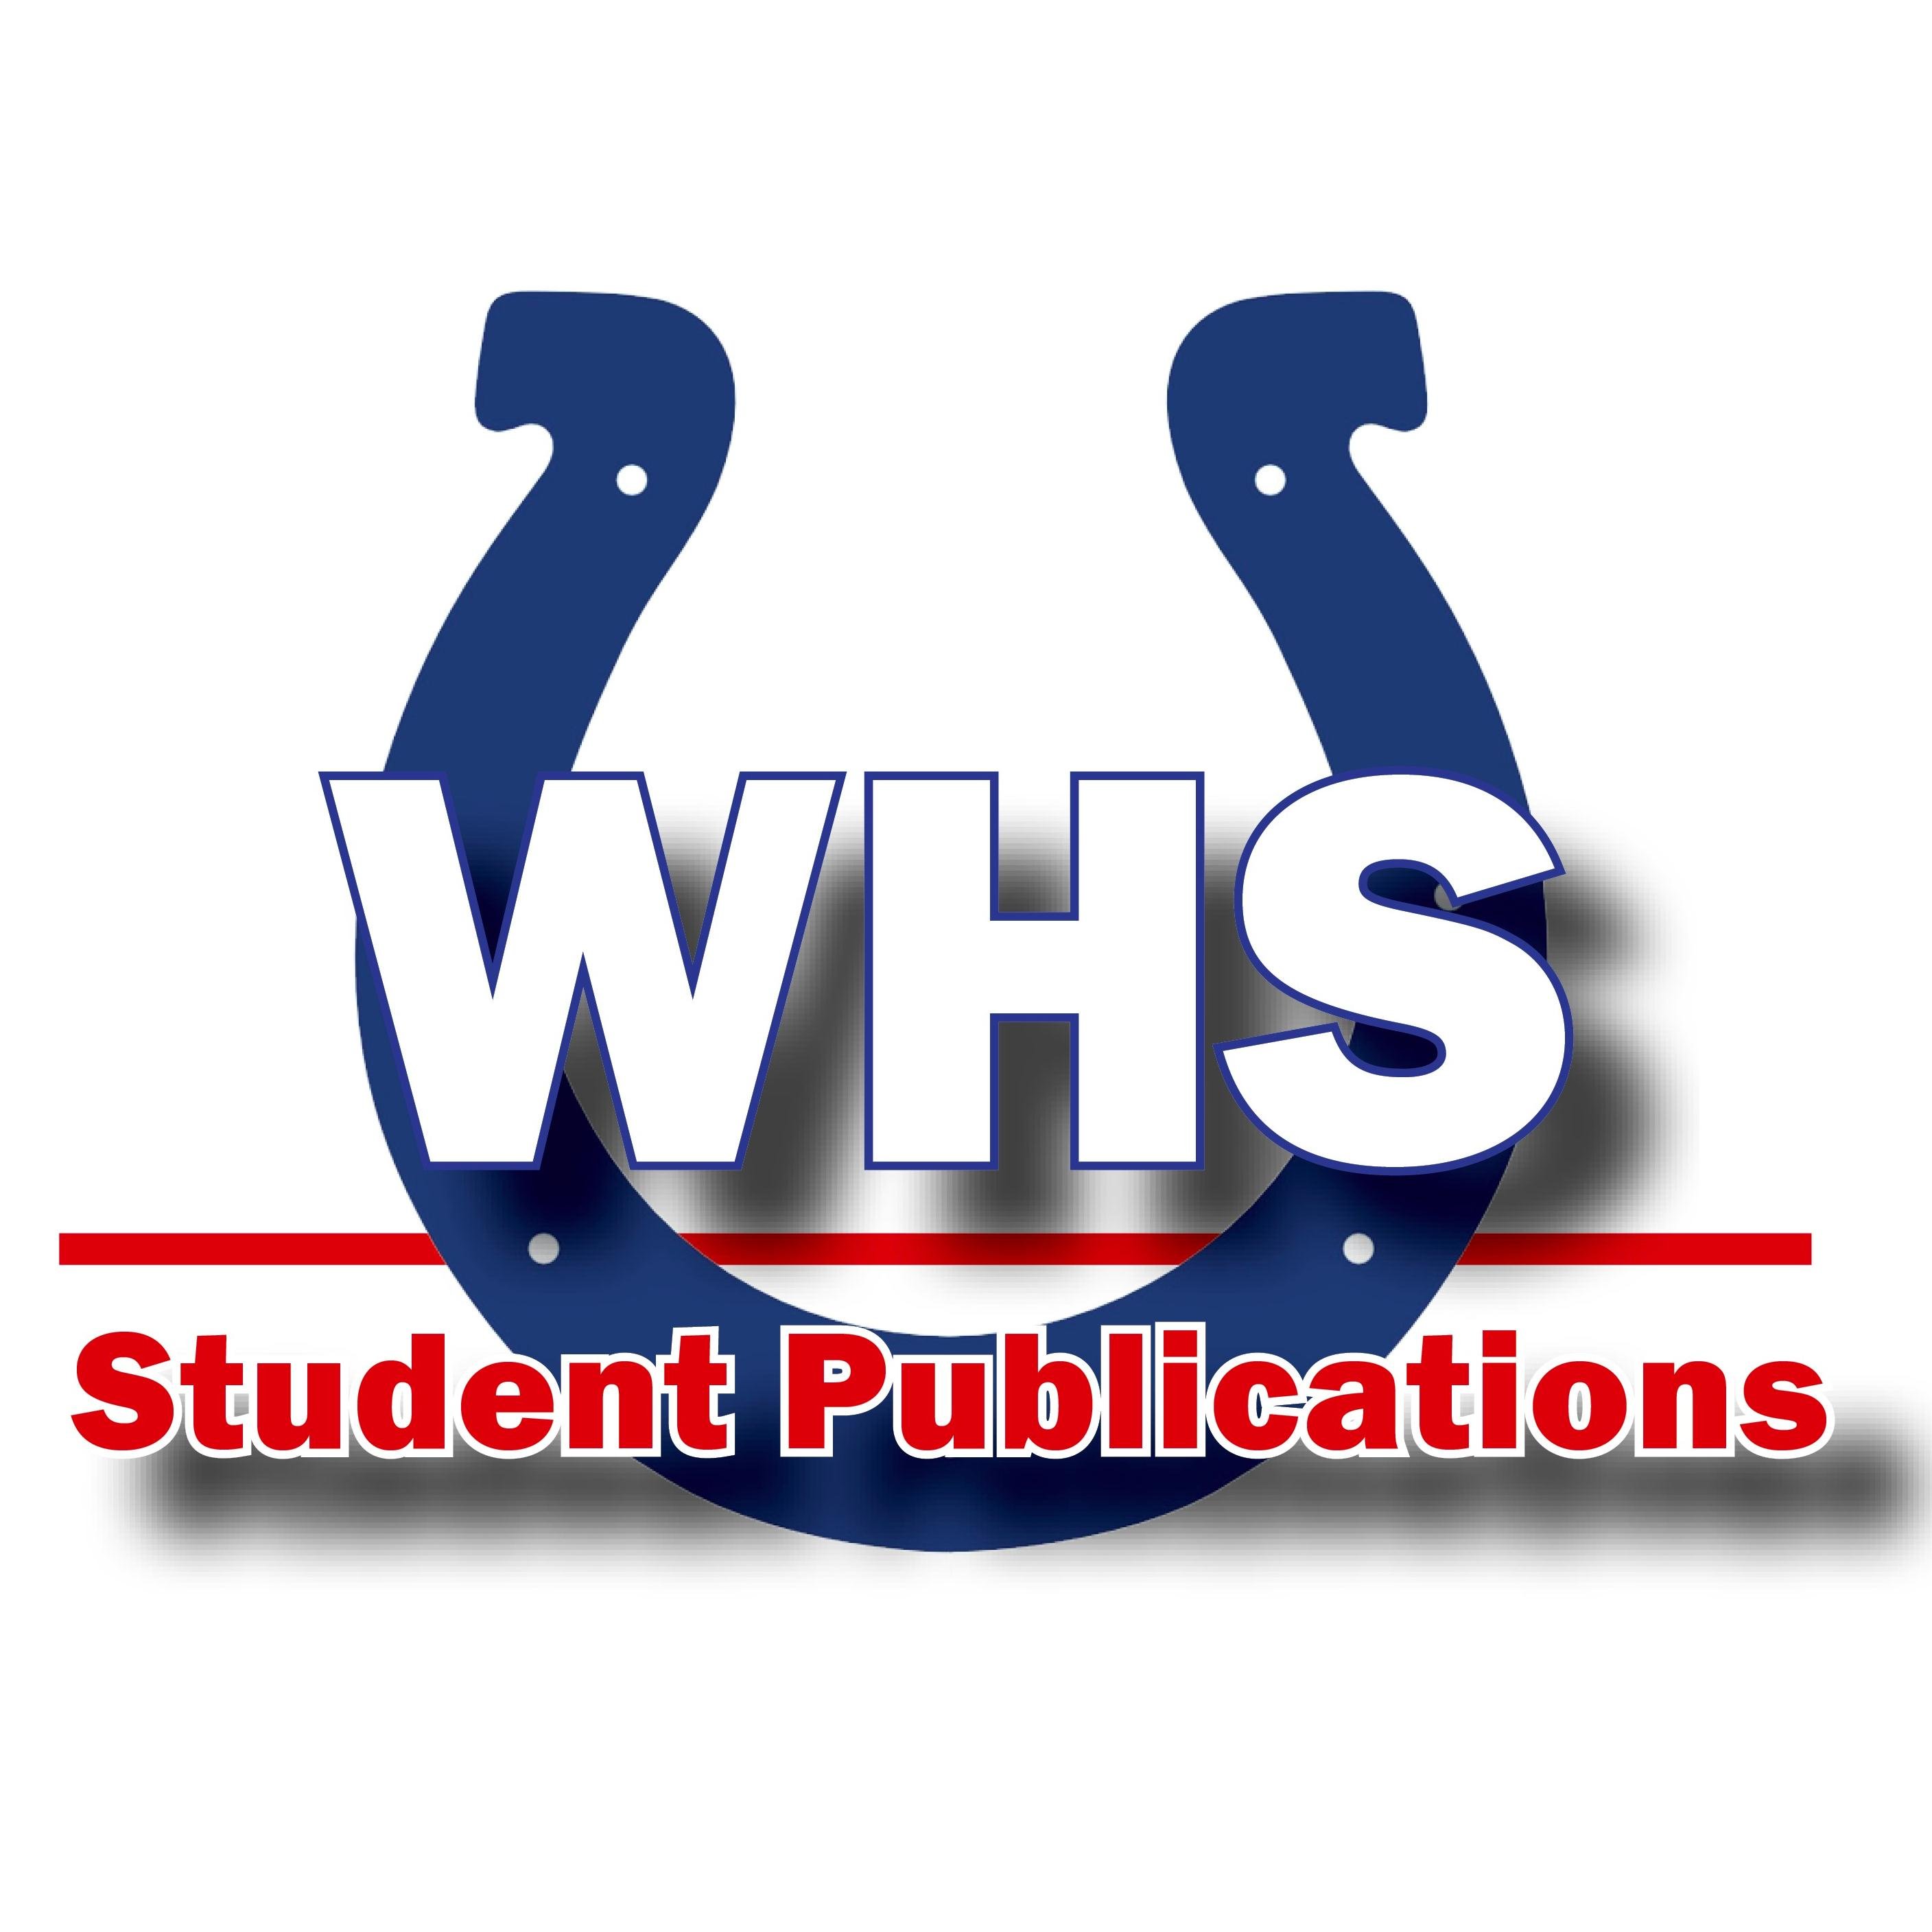 The Charger is the student newspaper of Wabaunsee High School in Alma, Kan.